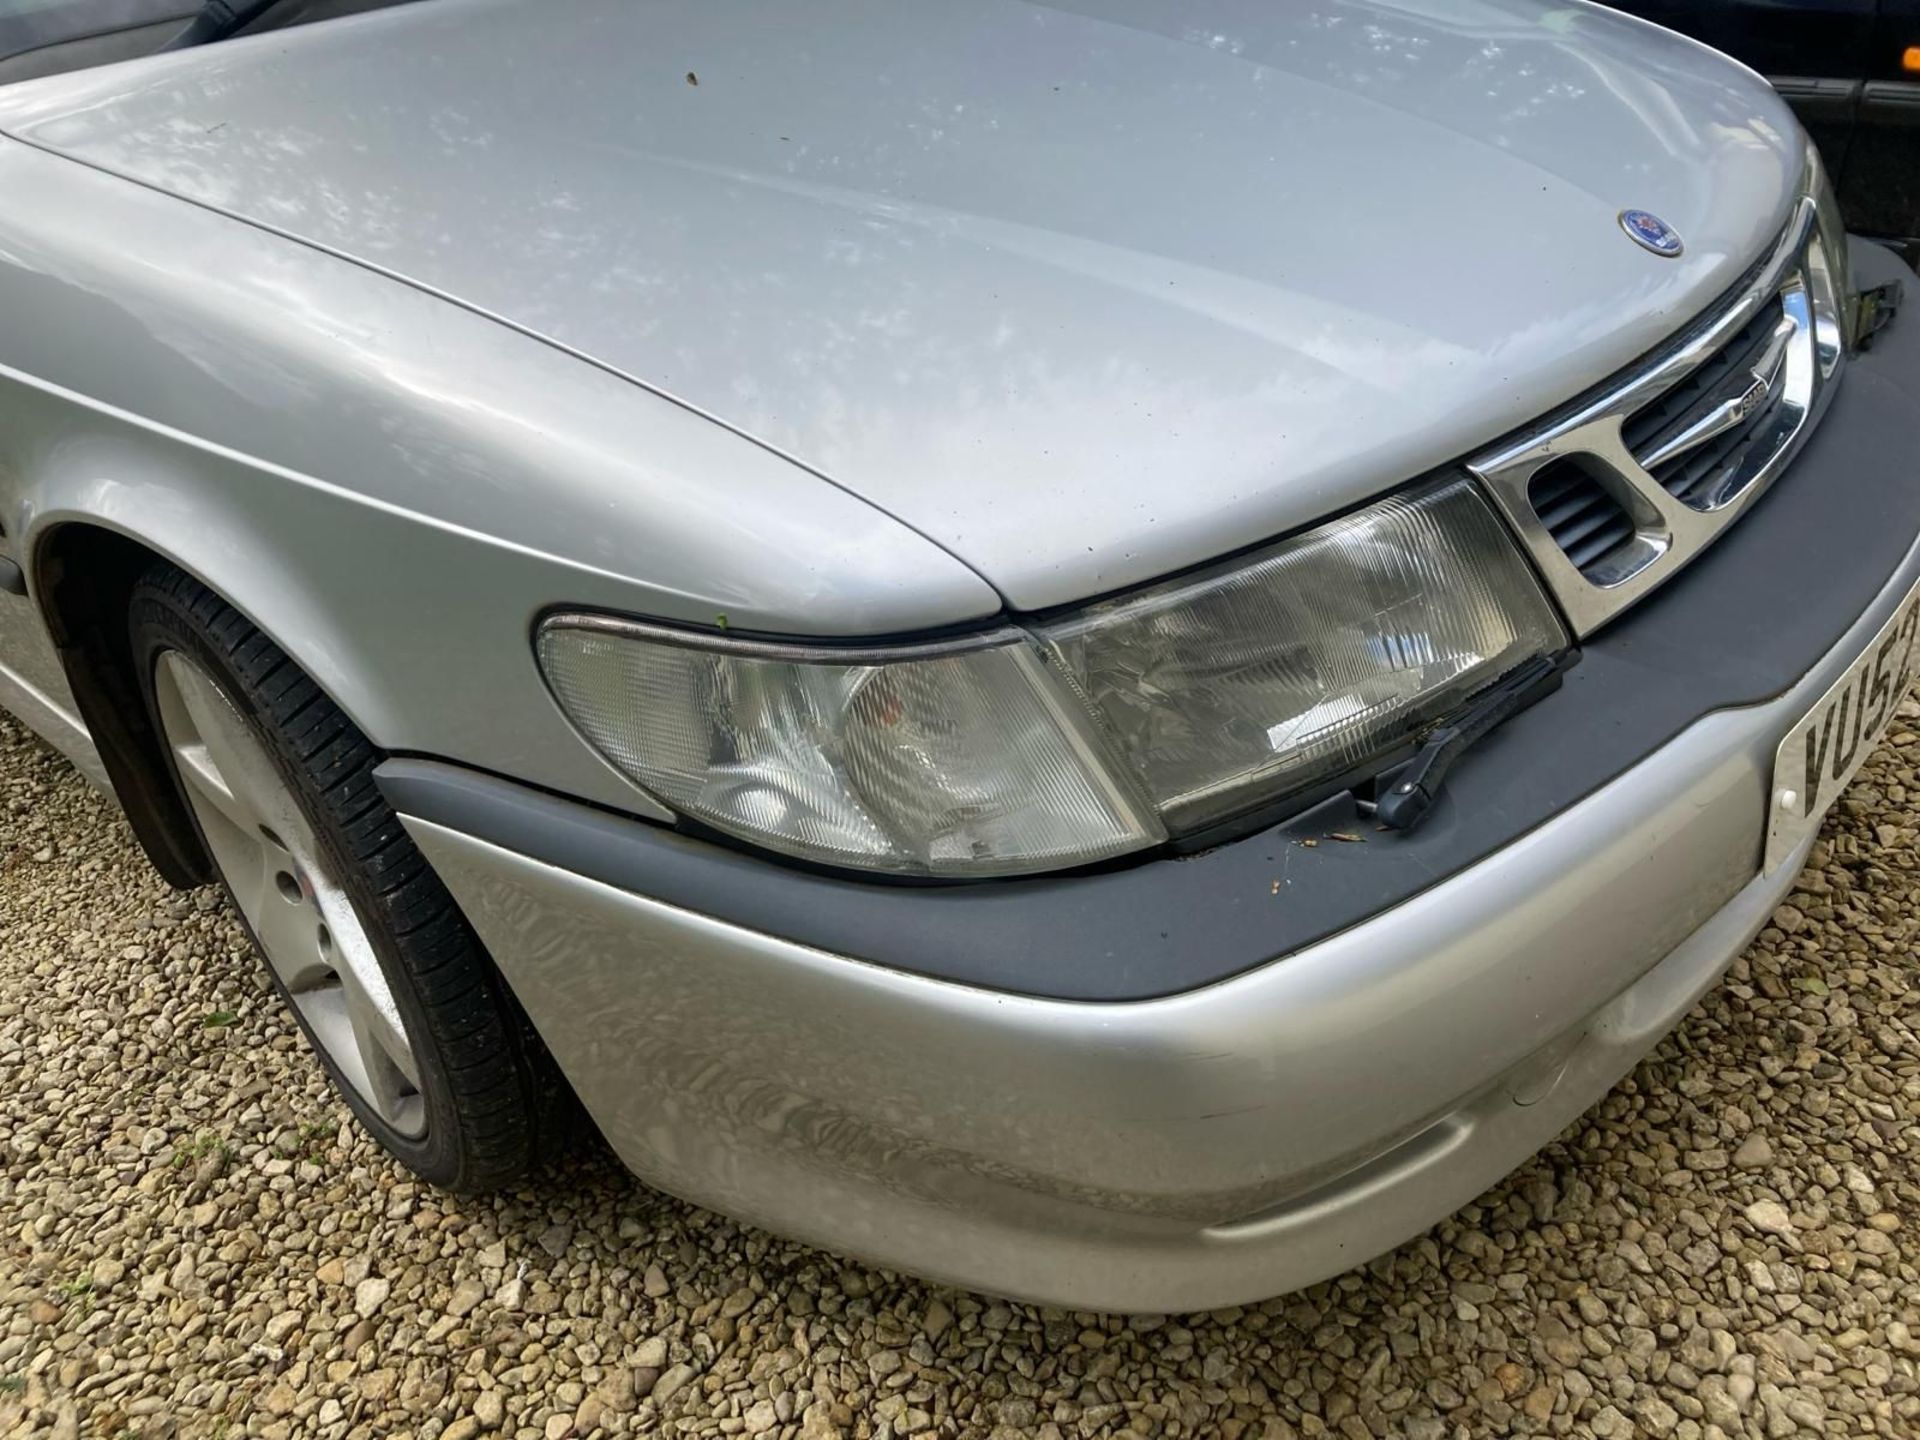 2002 Saab 9-3 Aero Convertible with 11 months MOT - Offered at No Reserve - Image 4 of 24